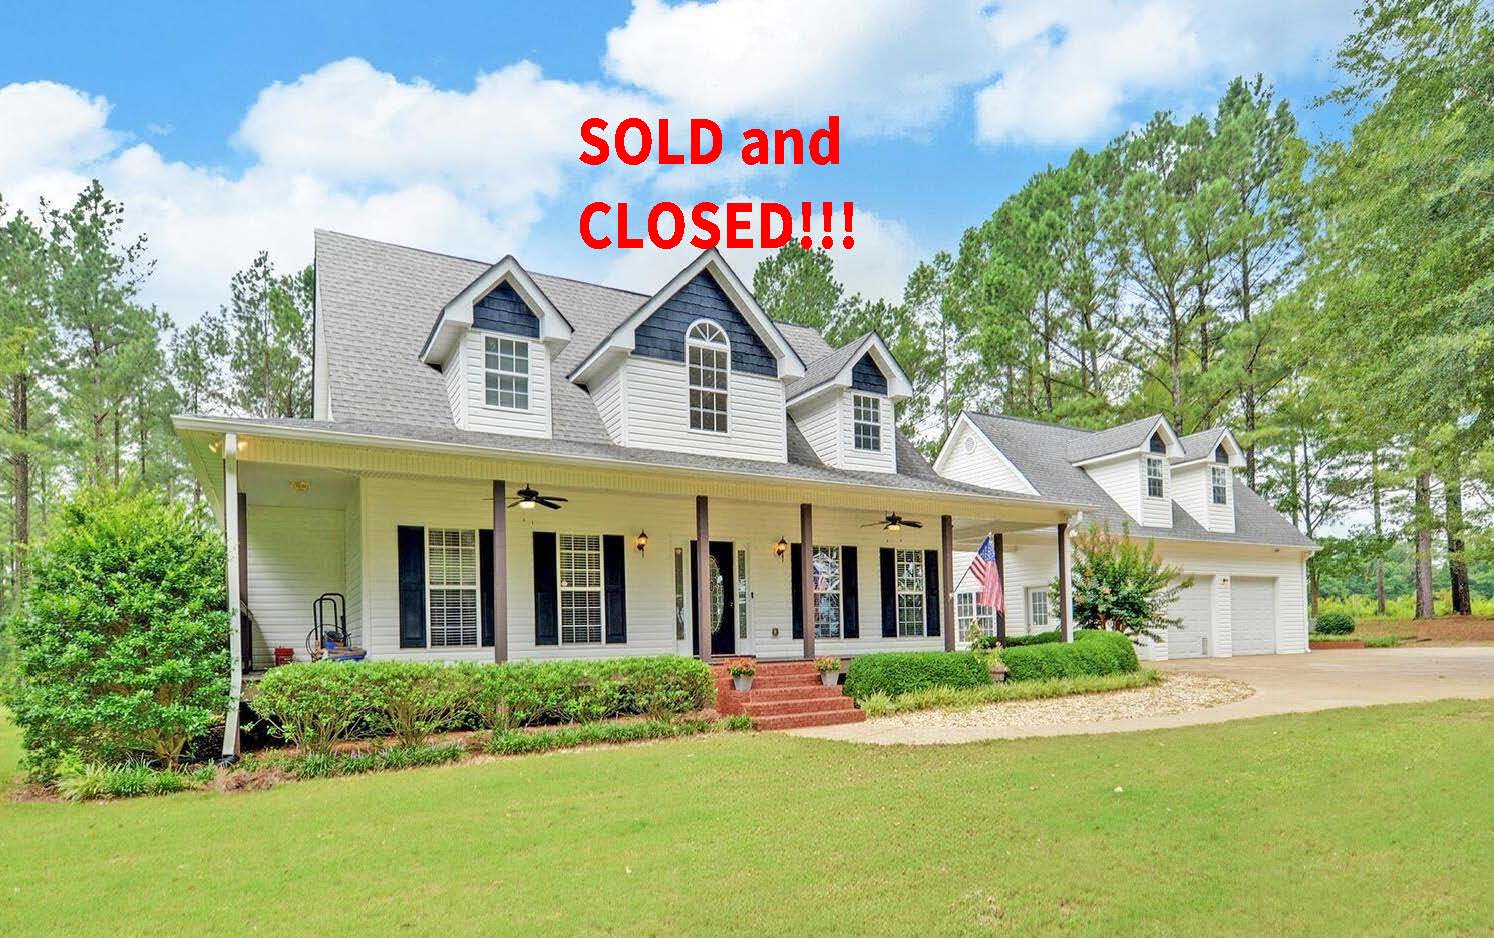 Picture of house sold and closed at 7010 Bostwick Rd Good Hope,GA